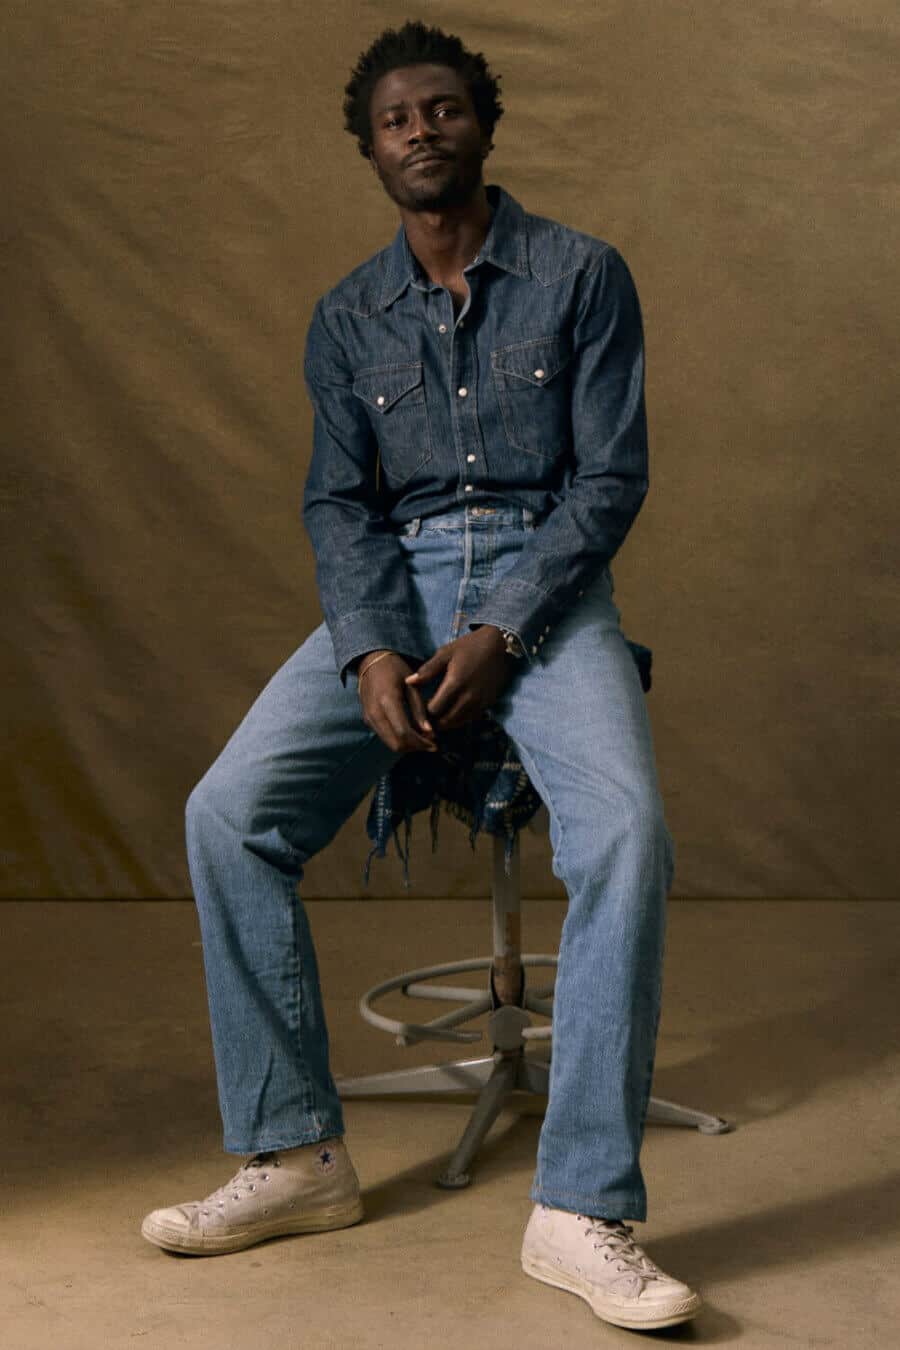 Men's double denim outfit - western shirt and mid wash jeans